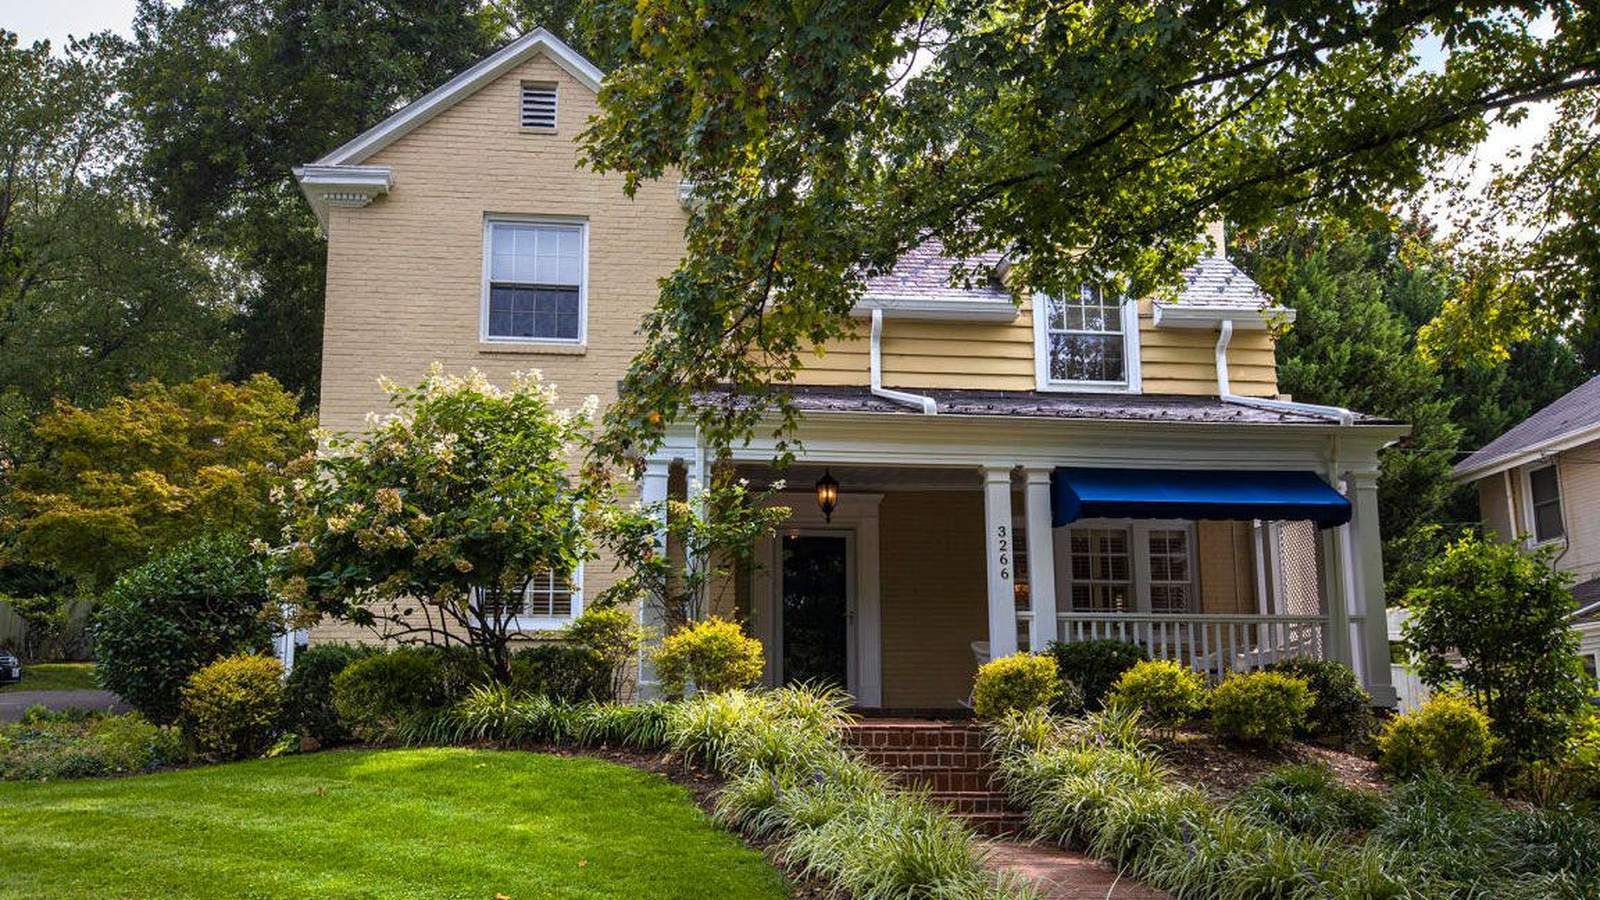 This gorgeous home in South Roanoke perfectly displays its original charm with updated renovations